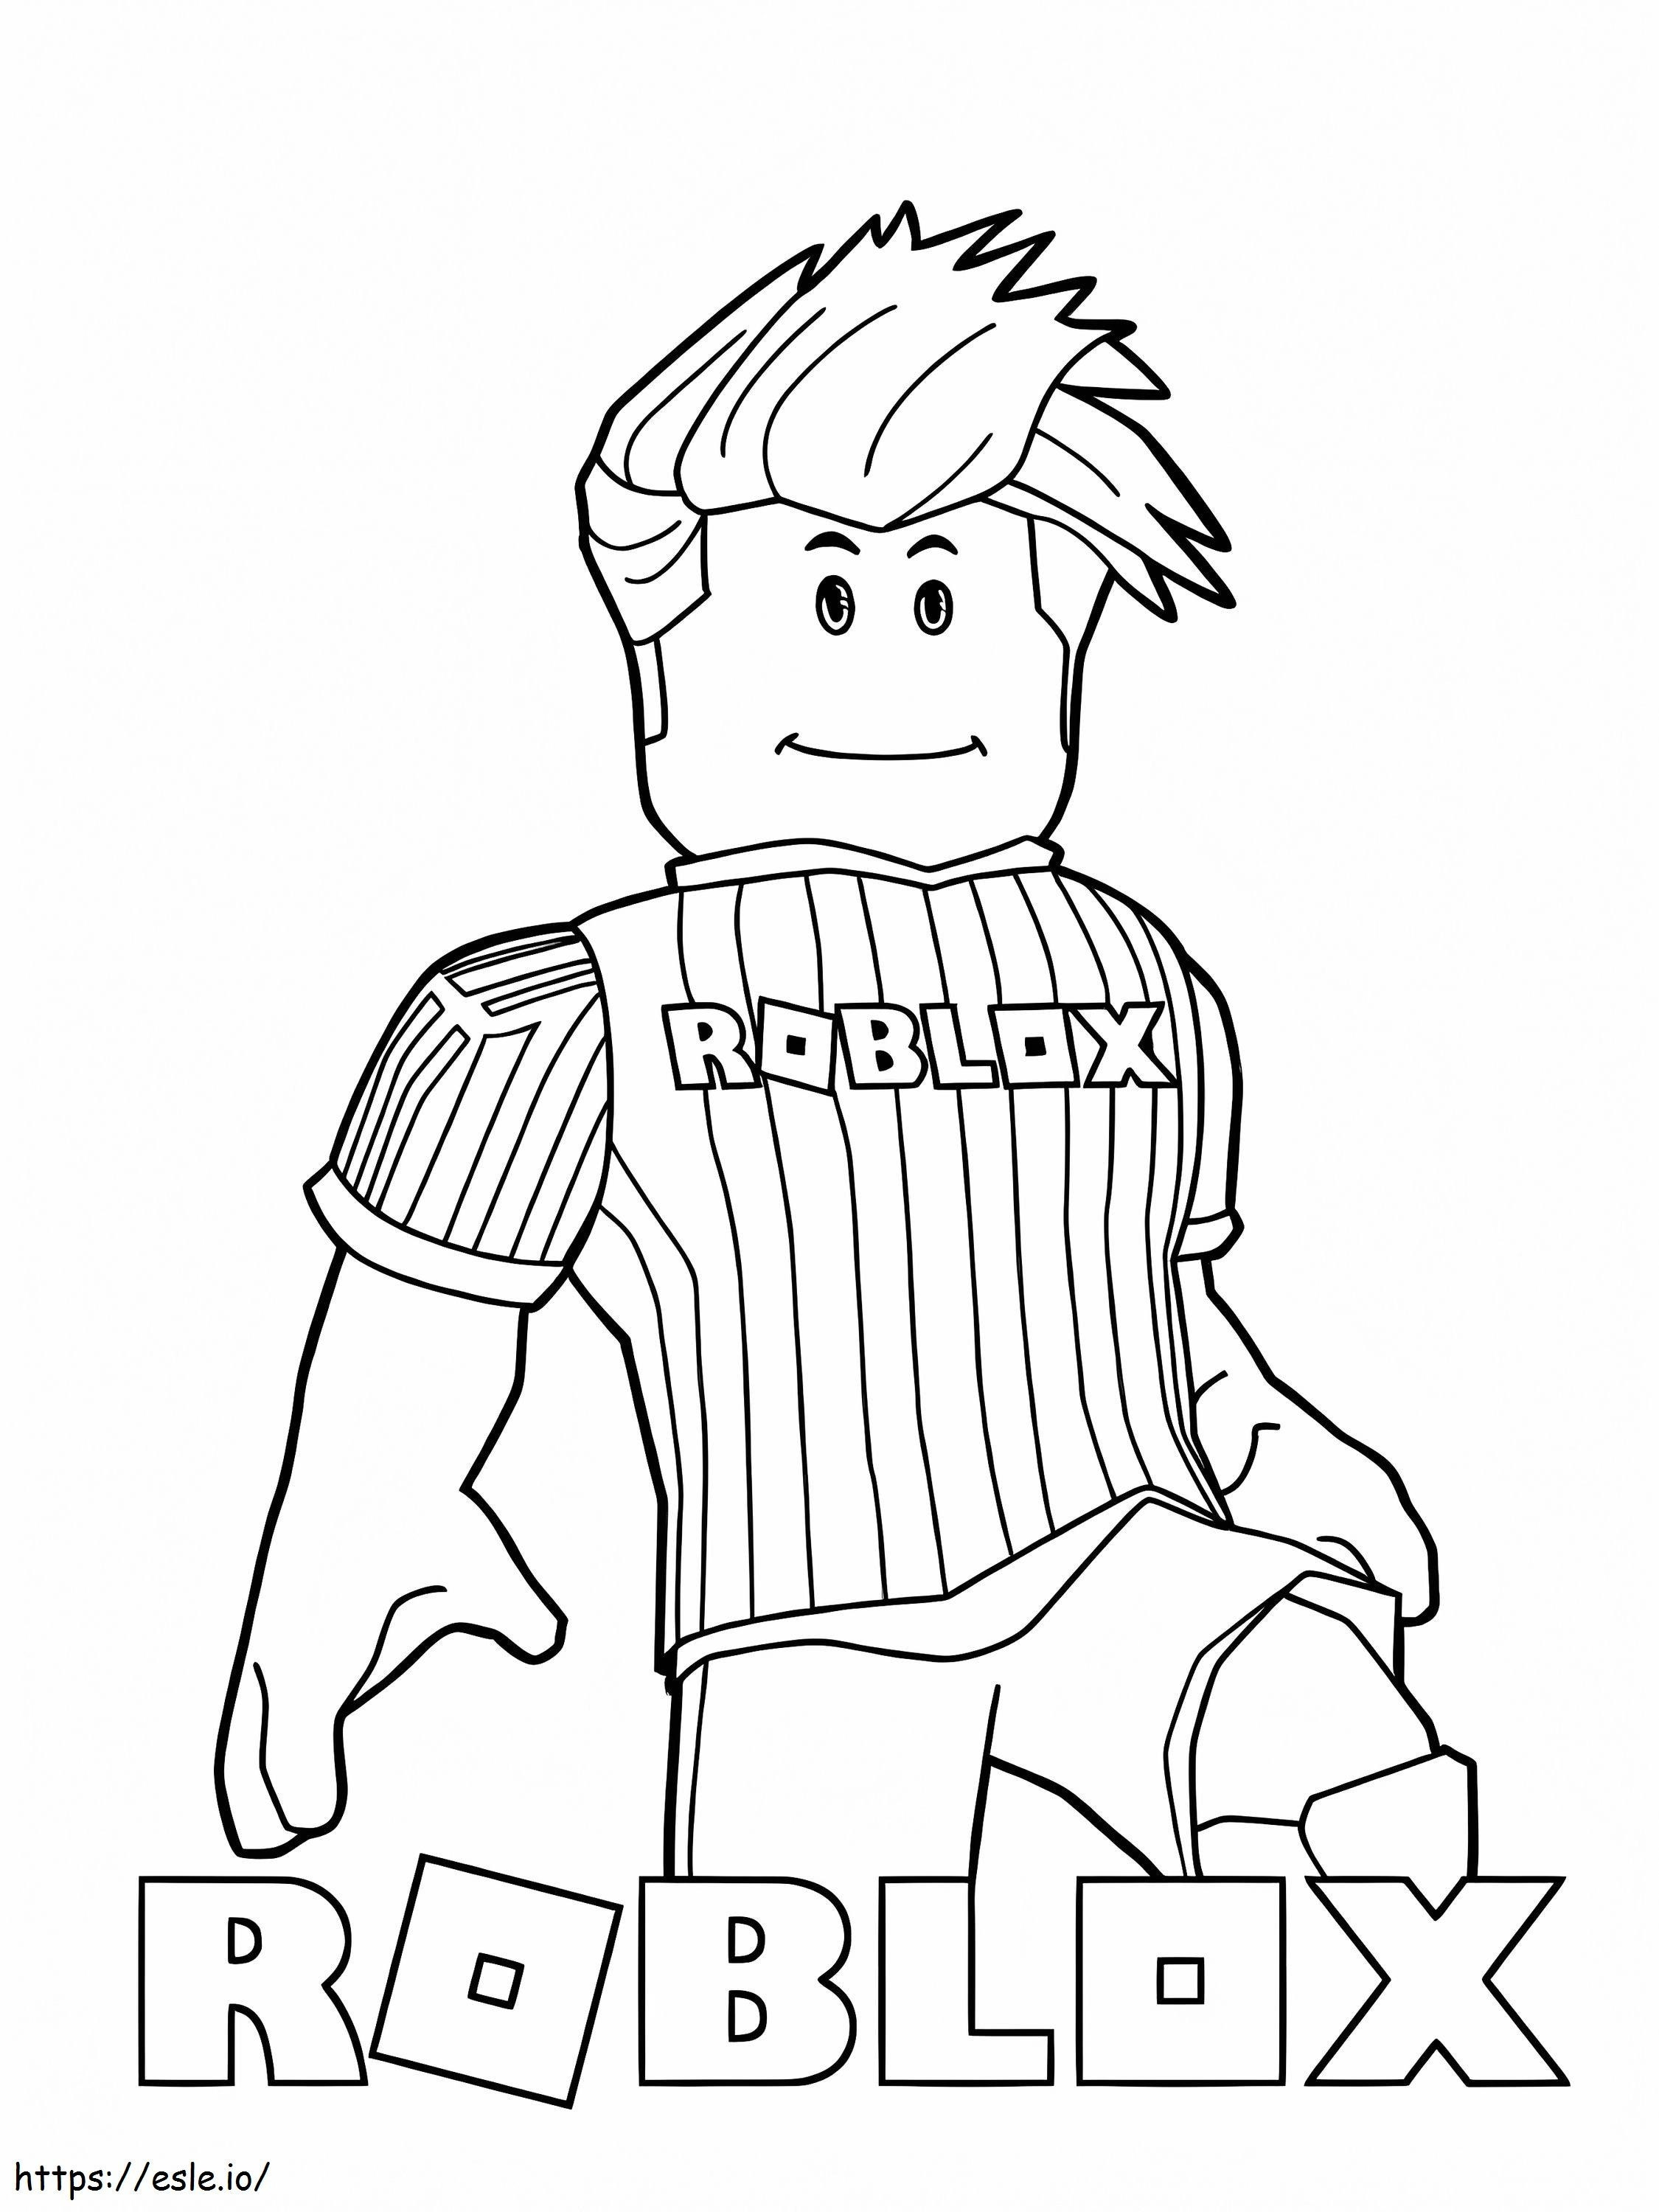 Roblox Soccer Player coloring page